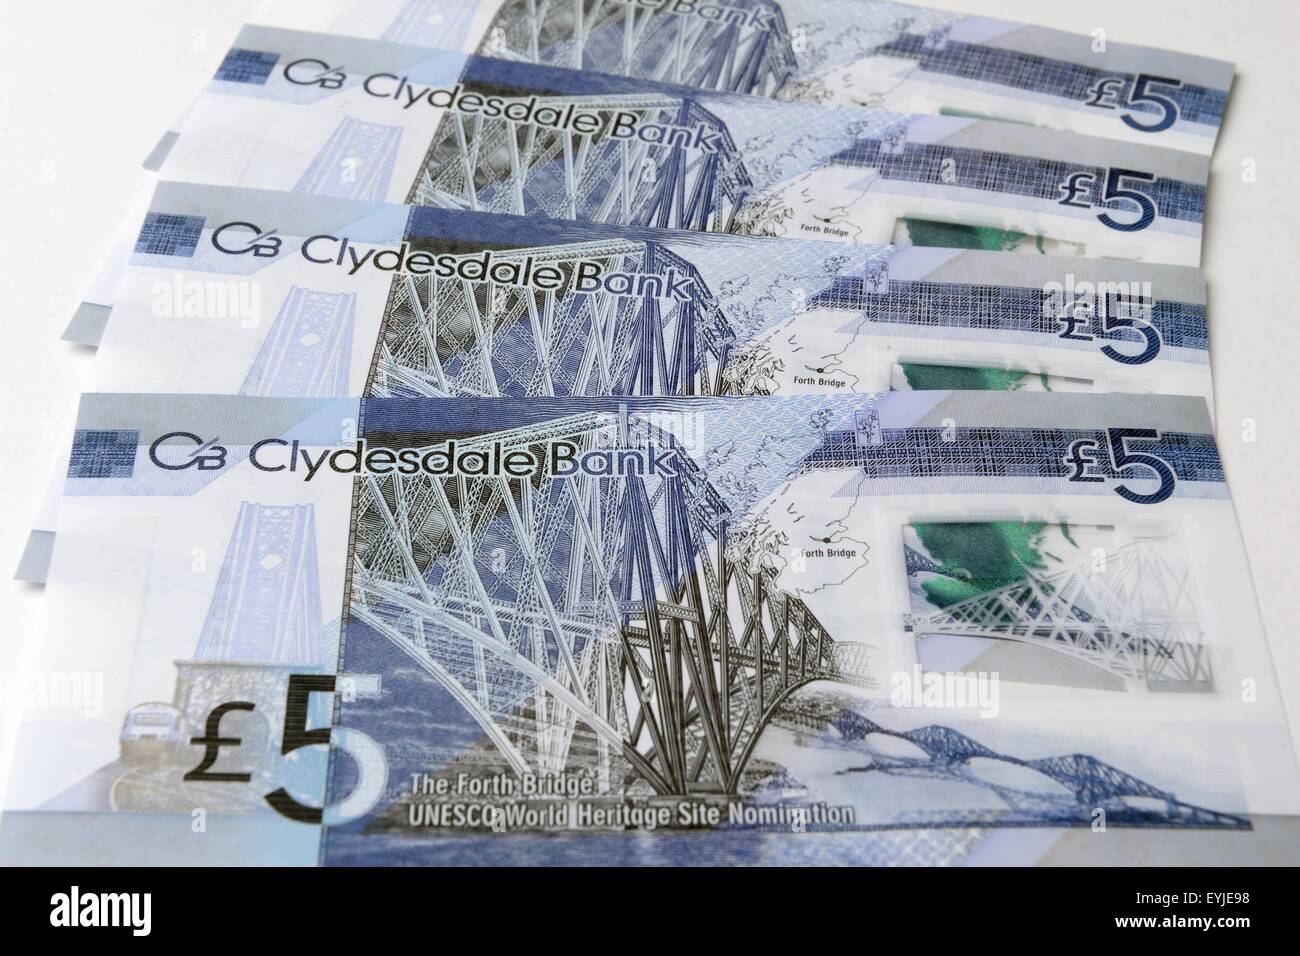 Clydesdale bank plastic £5 notes showing the newly designated world heritage Forth rail bridge in Scotland, UK Stock Photo